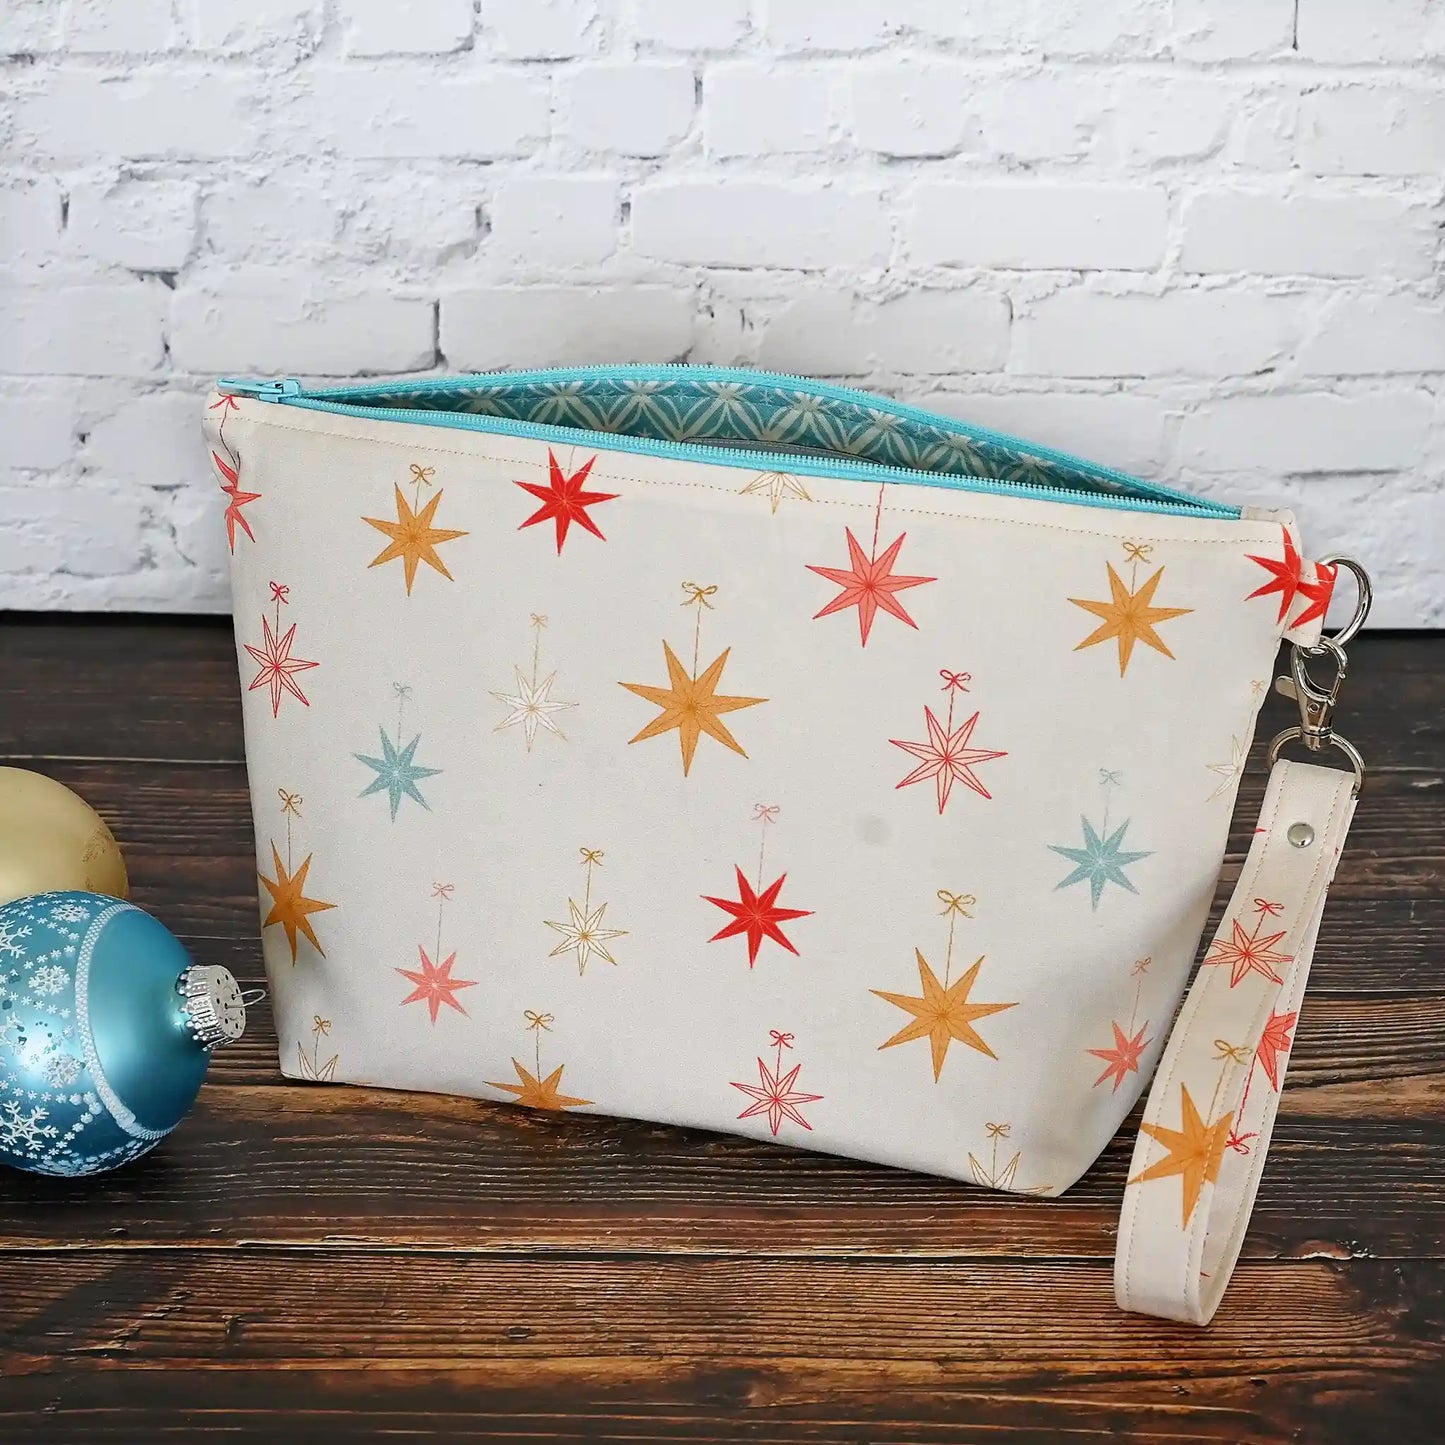 Pretty Pouch with Holiday Stars, lined in aqua fabrics.   Comes with a removable wrist Strap.  Made in Canada by Yellow Petal Handmade.